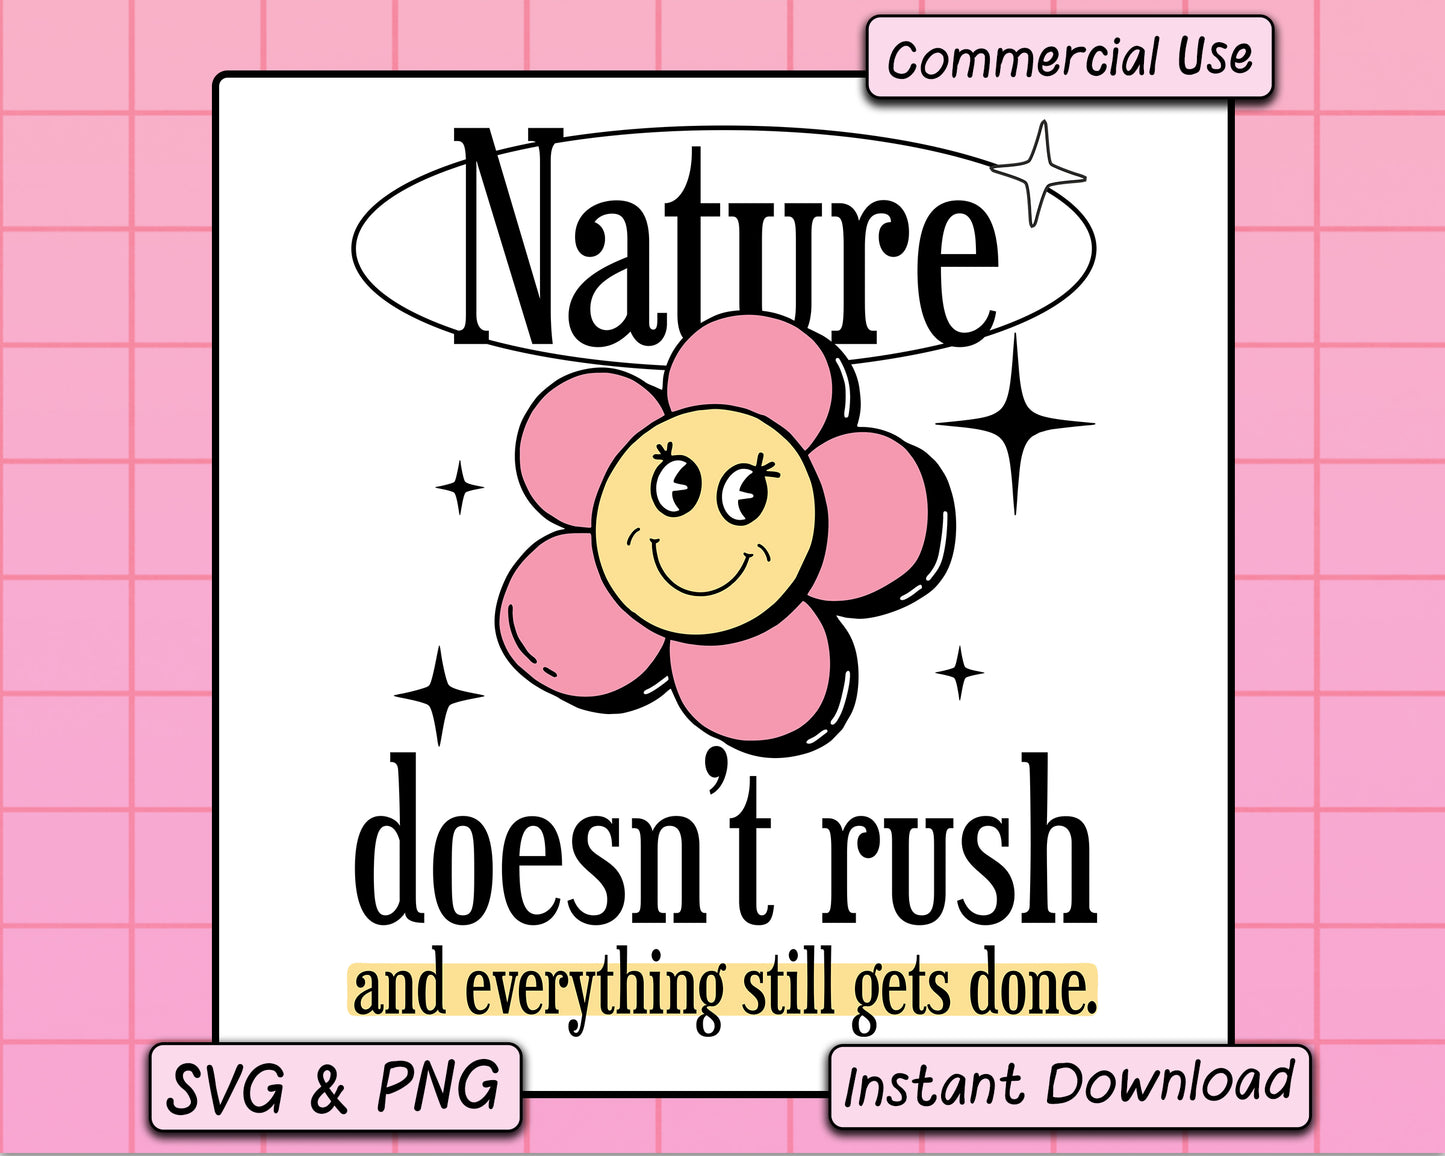 Nature Doesn't Rush - SVG & PNG